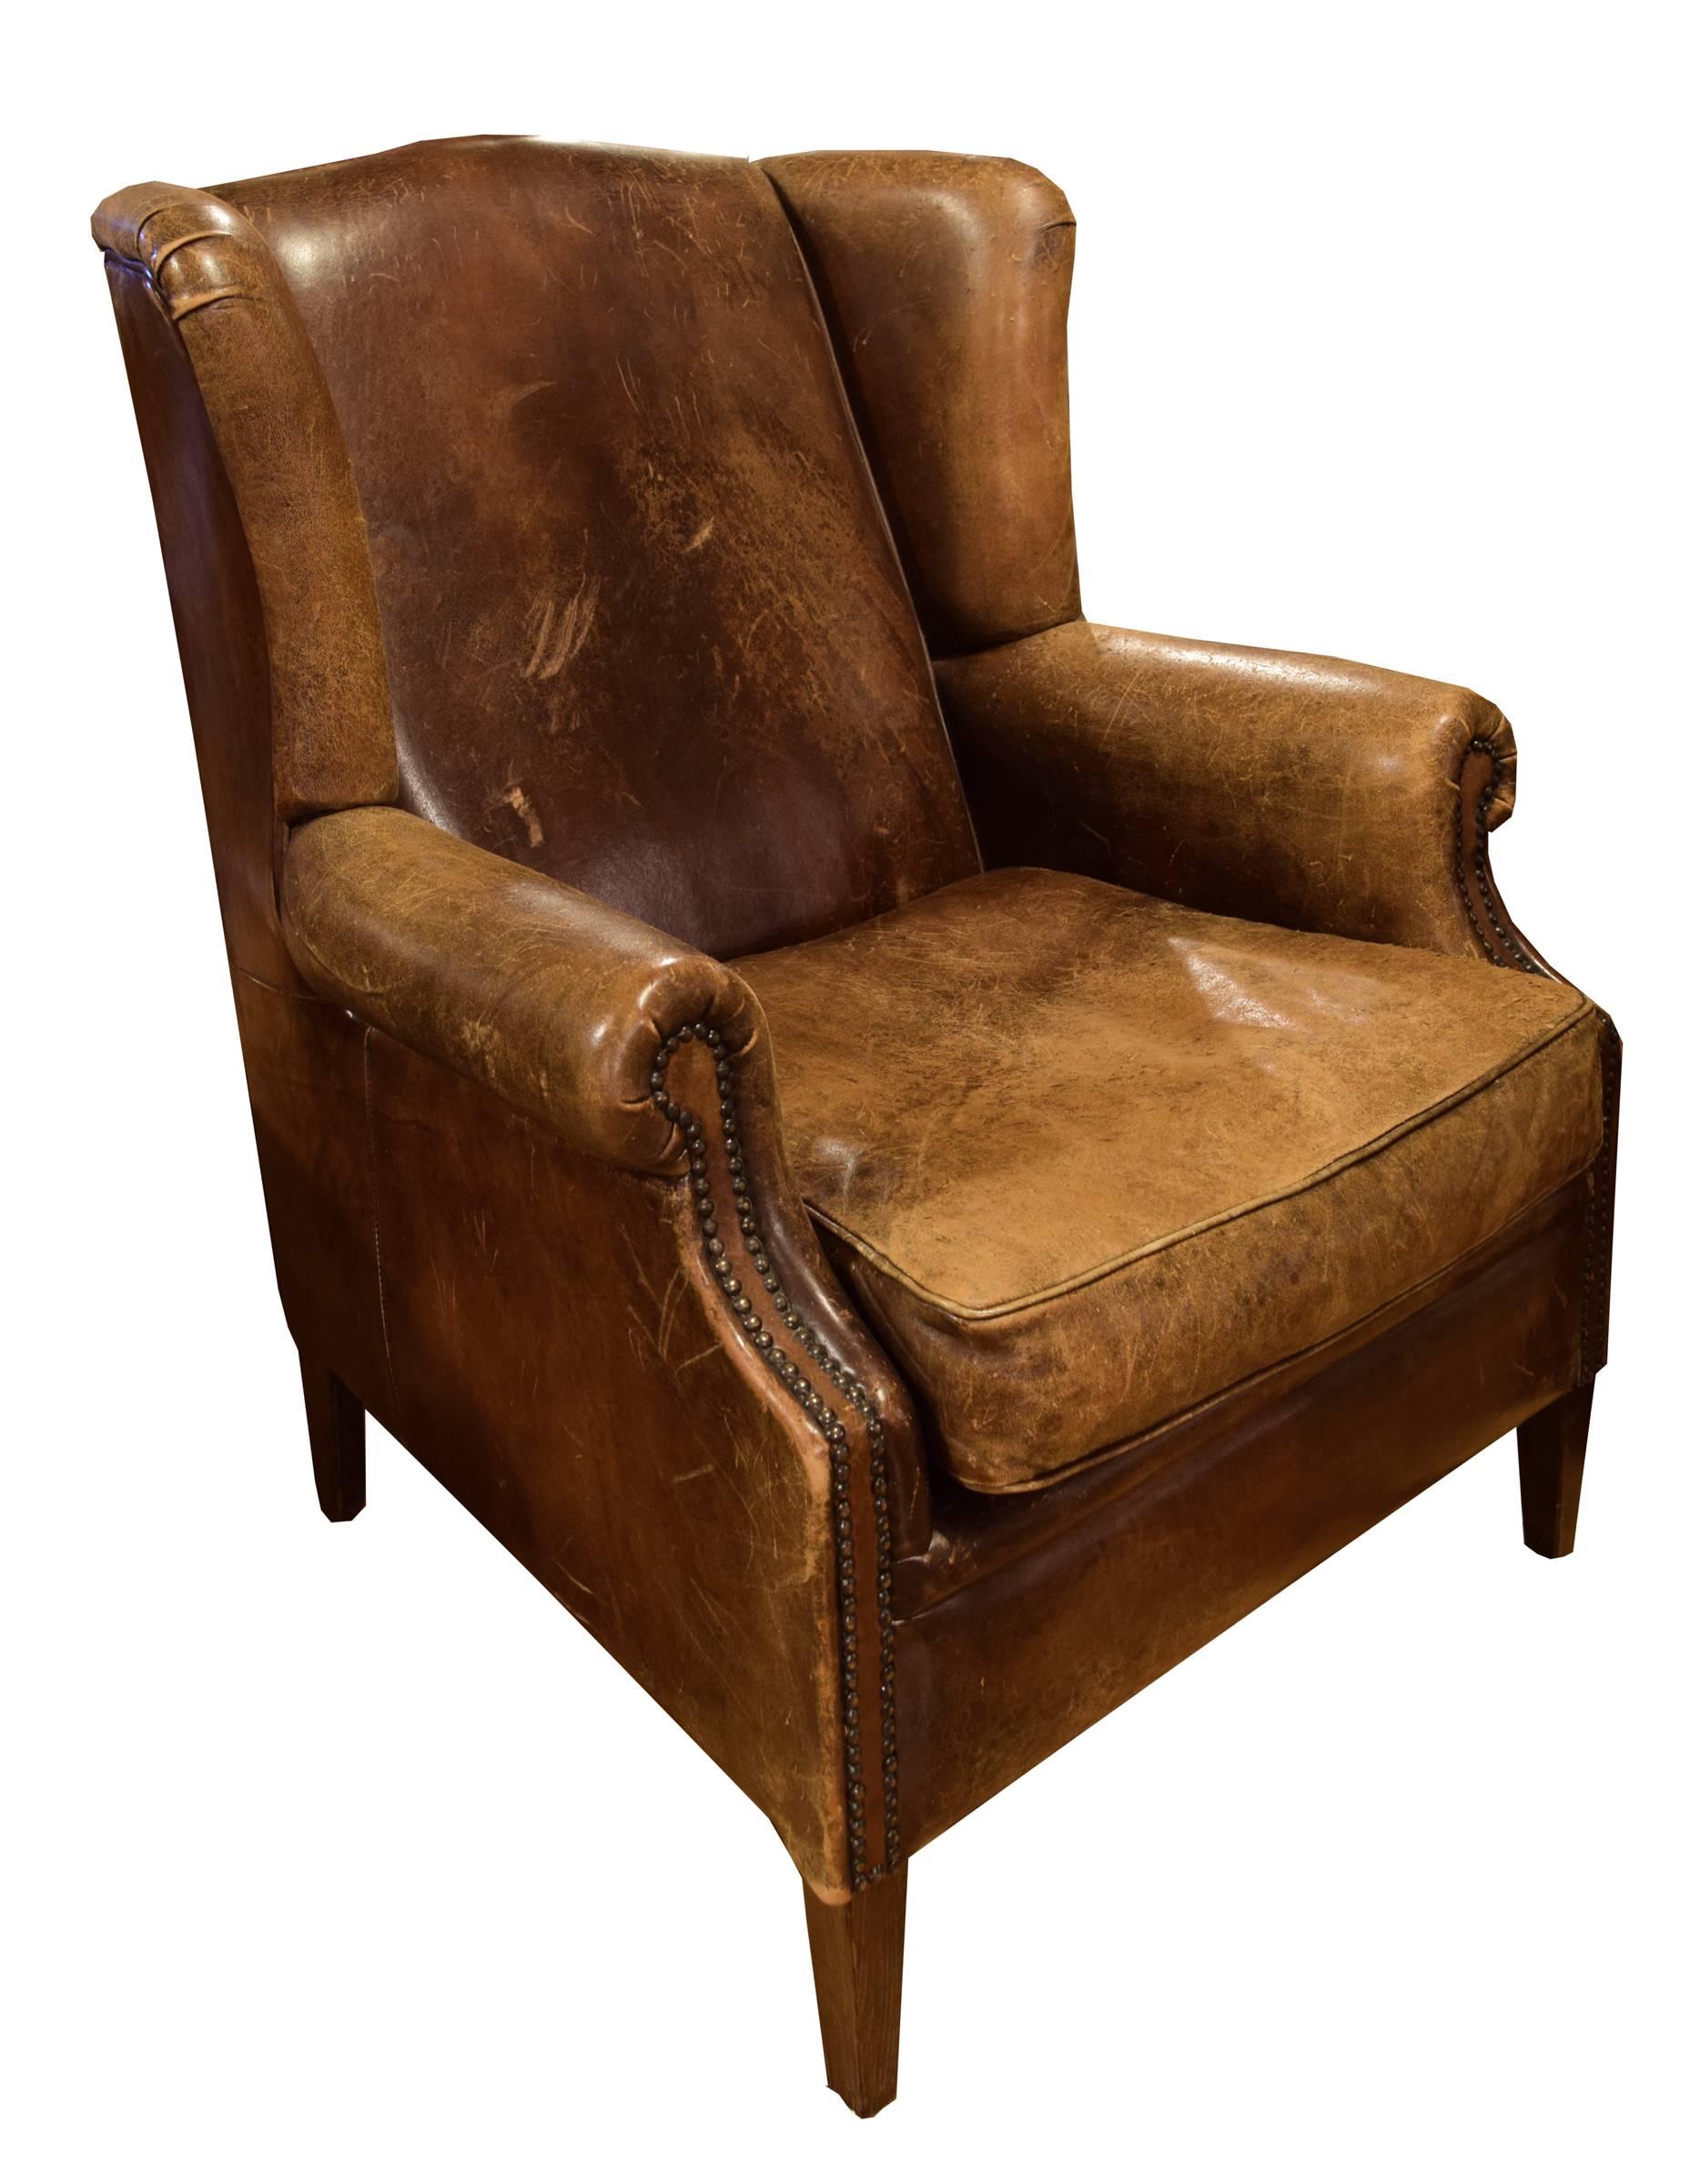 A fabulous Italian leather wingback chair from the early 20th century. This chair has wooden feet, scrolled arms with studded detailing, and a beautiful patina.